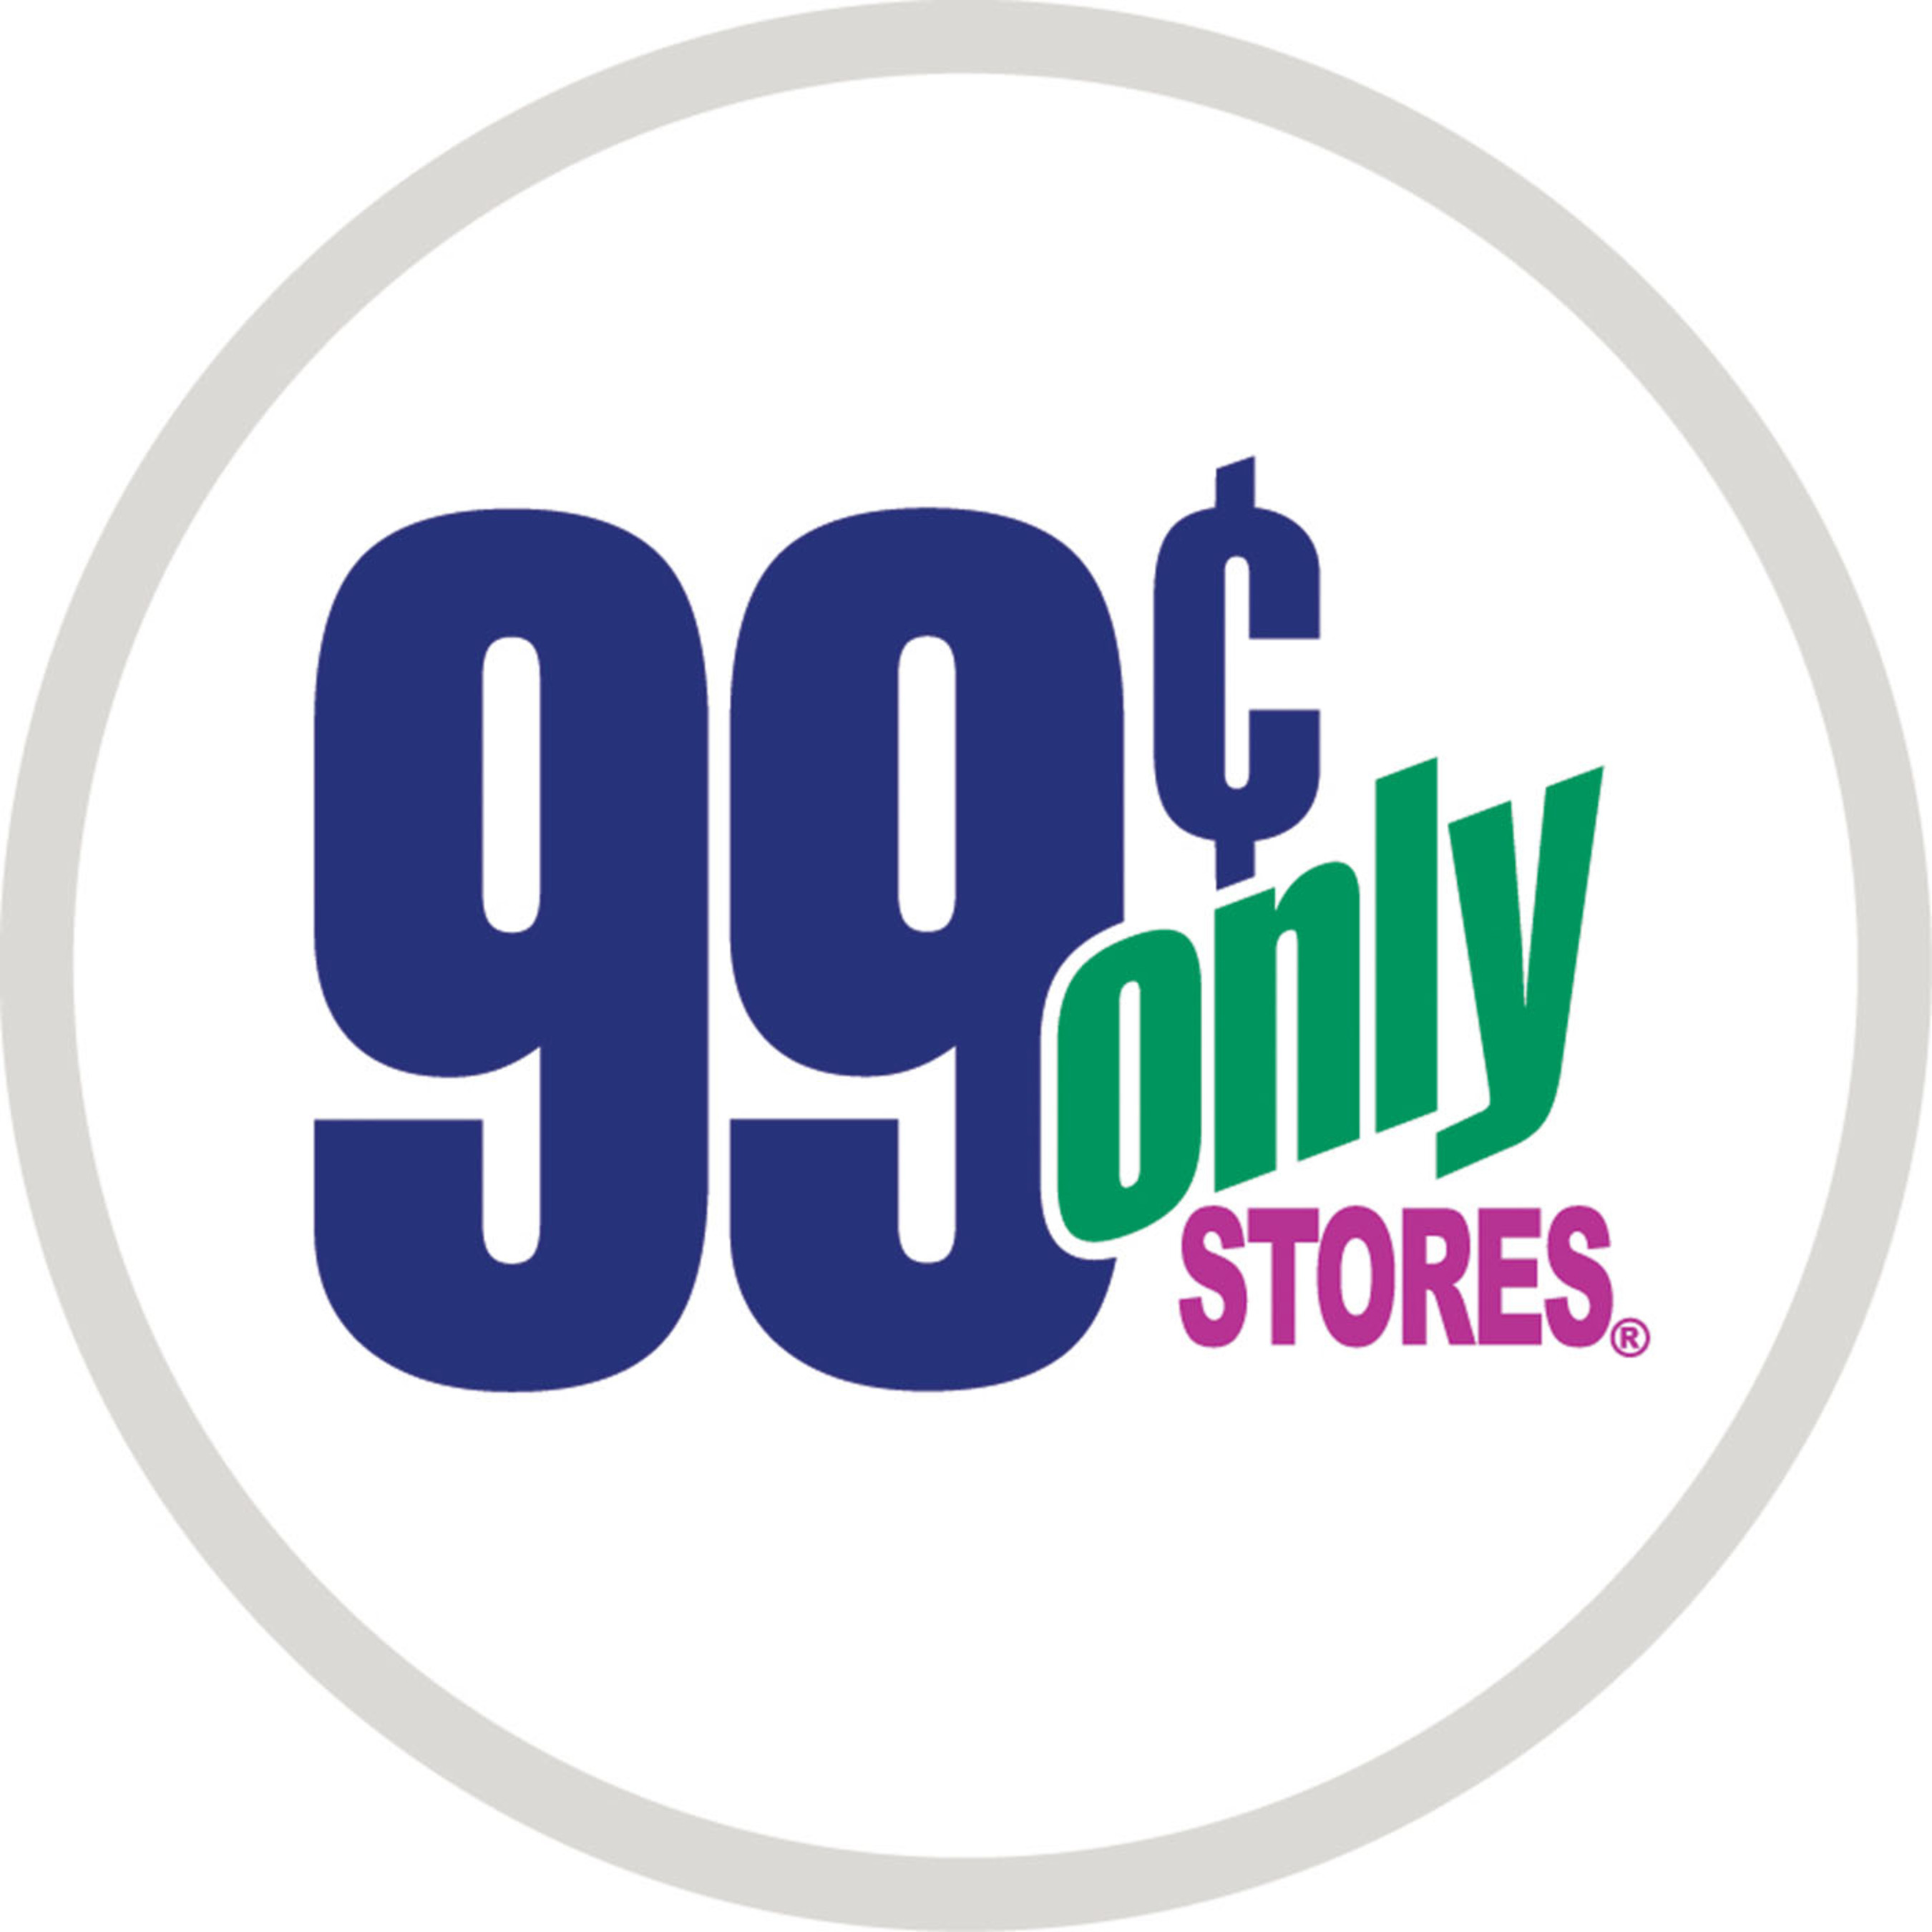 99 Cents Only Stores LLC.